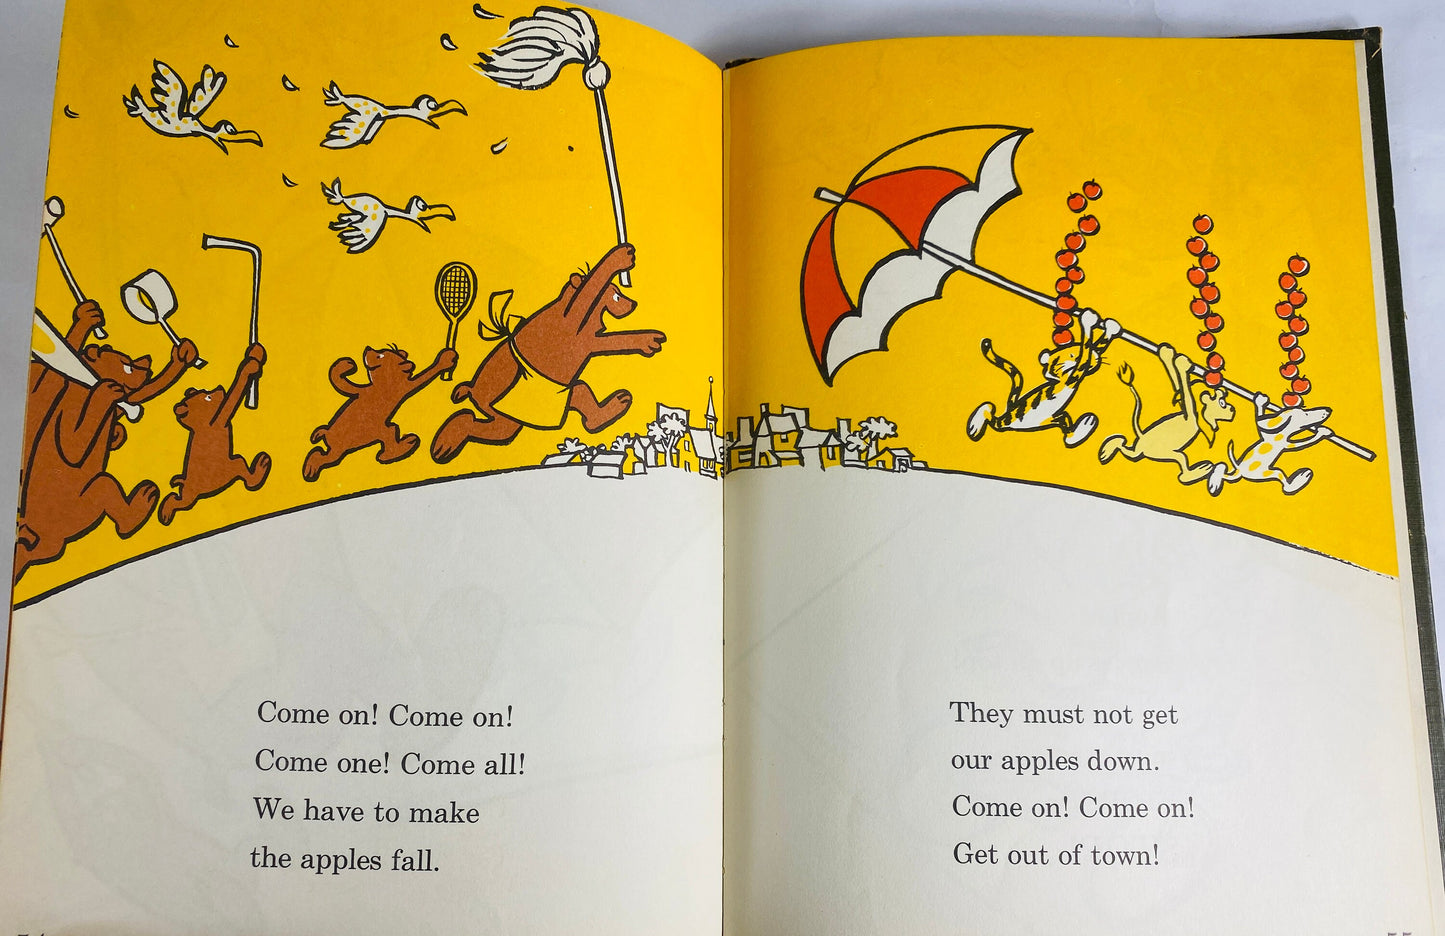 Ten Apples Up on Top vintage Dr Seuss book circa 1961 by Theodor Geisel collectible children's book early beginning reader BCE